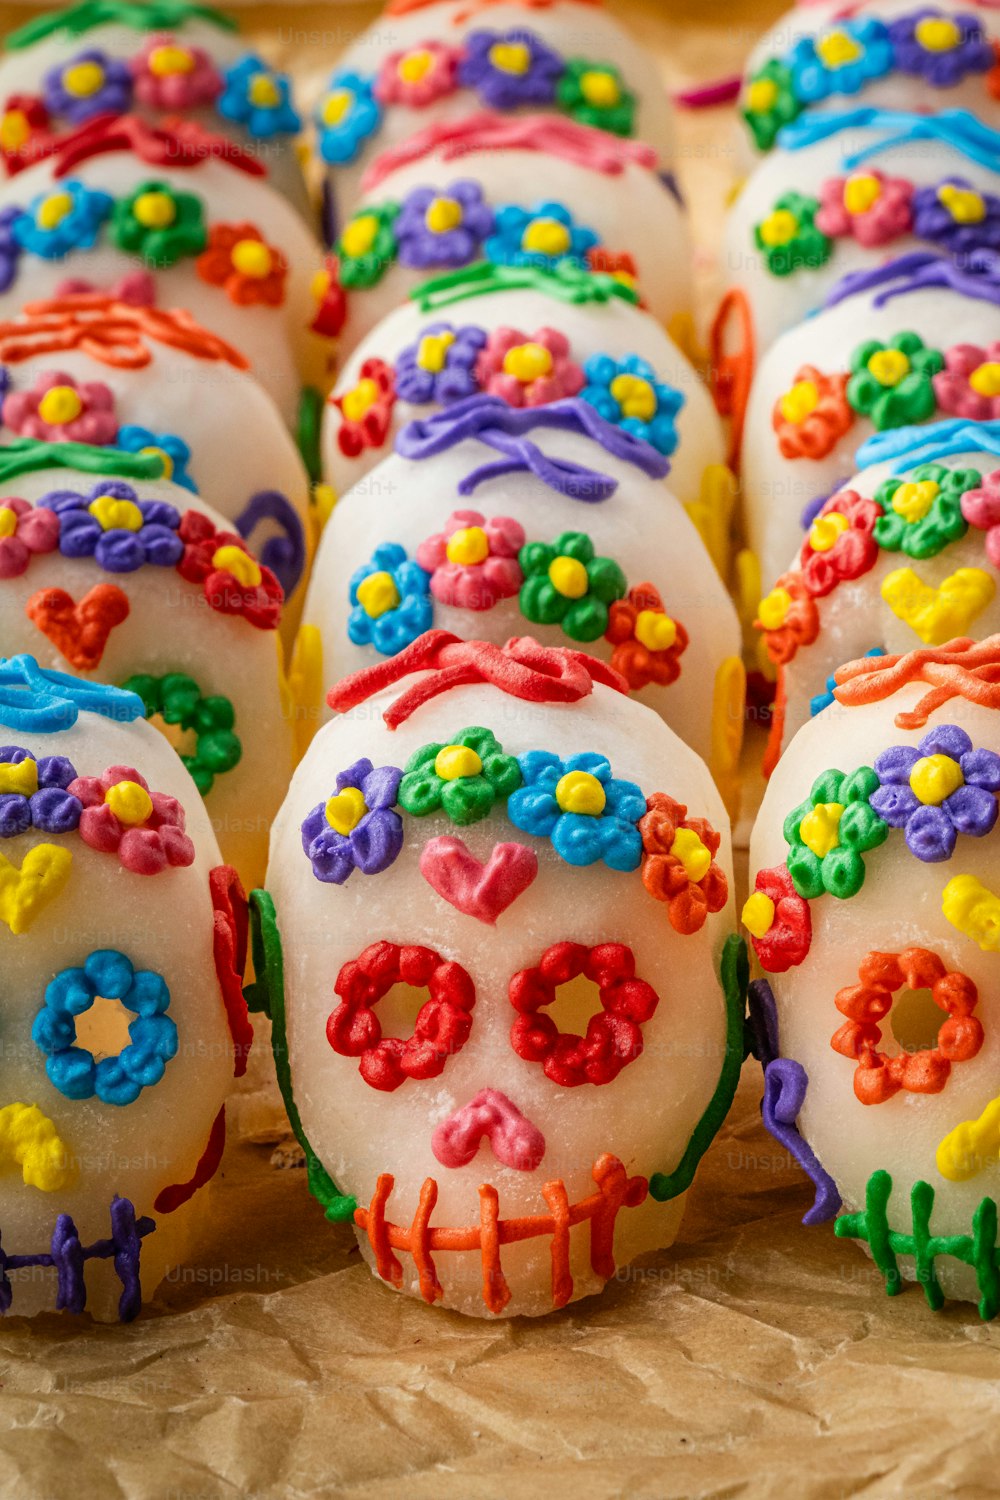 a close up of a tray of decorated donuts